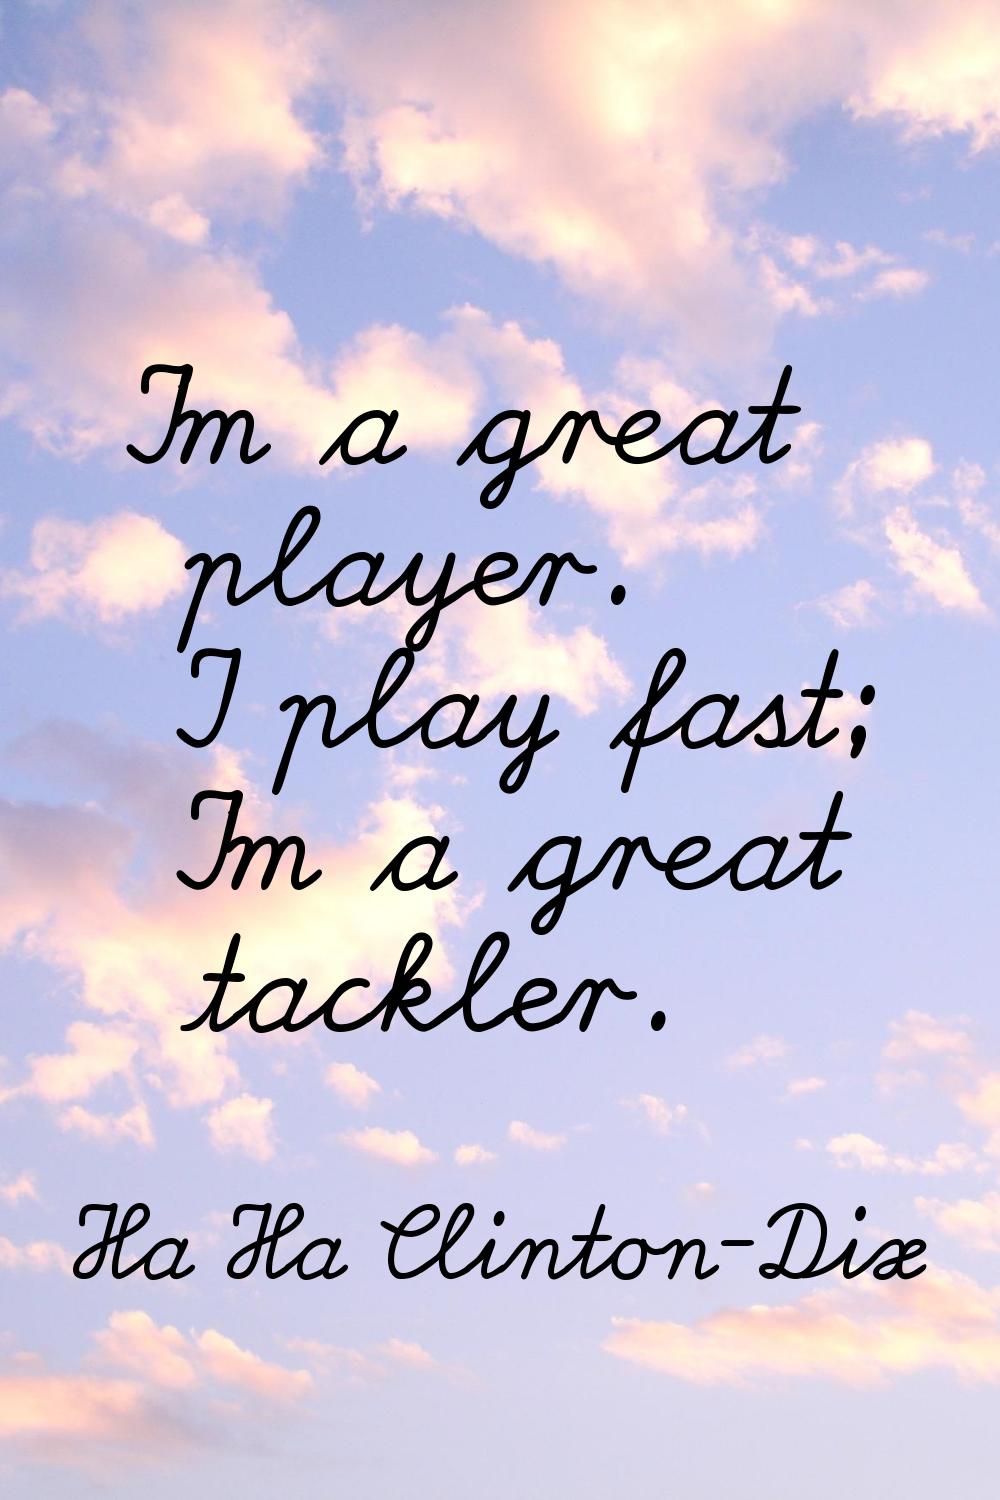 I'm a great player. I play fast; I'm a great tackler.